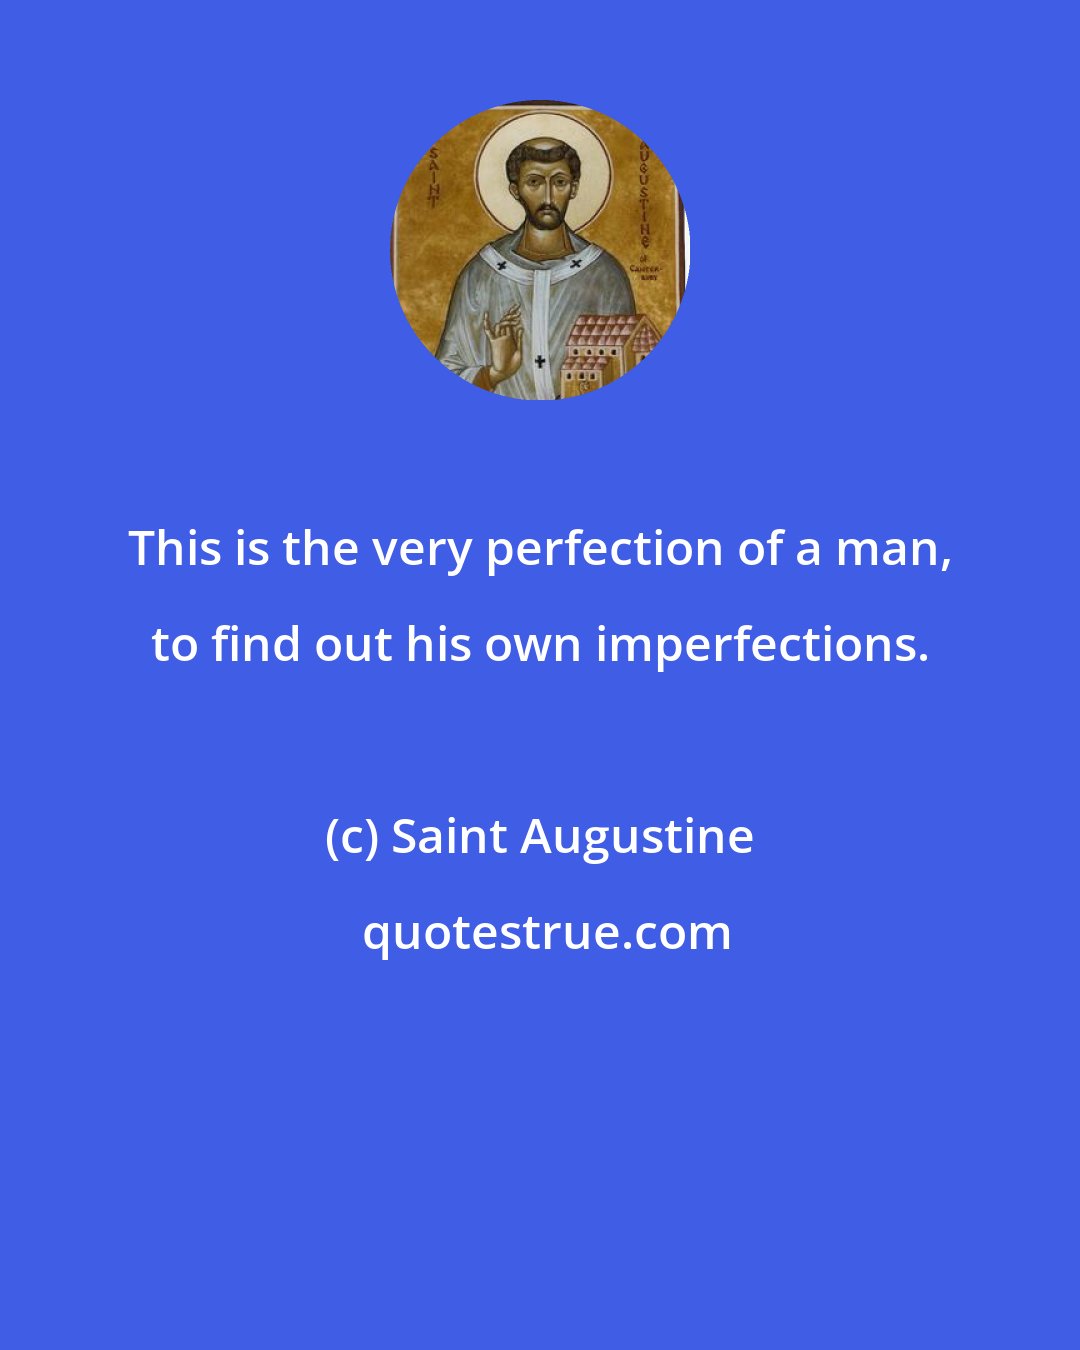 Saint Augustine: This is the very perfection of a man, to find out his own imperfections.